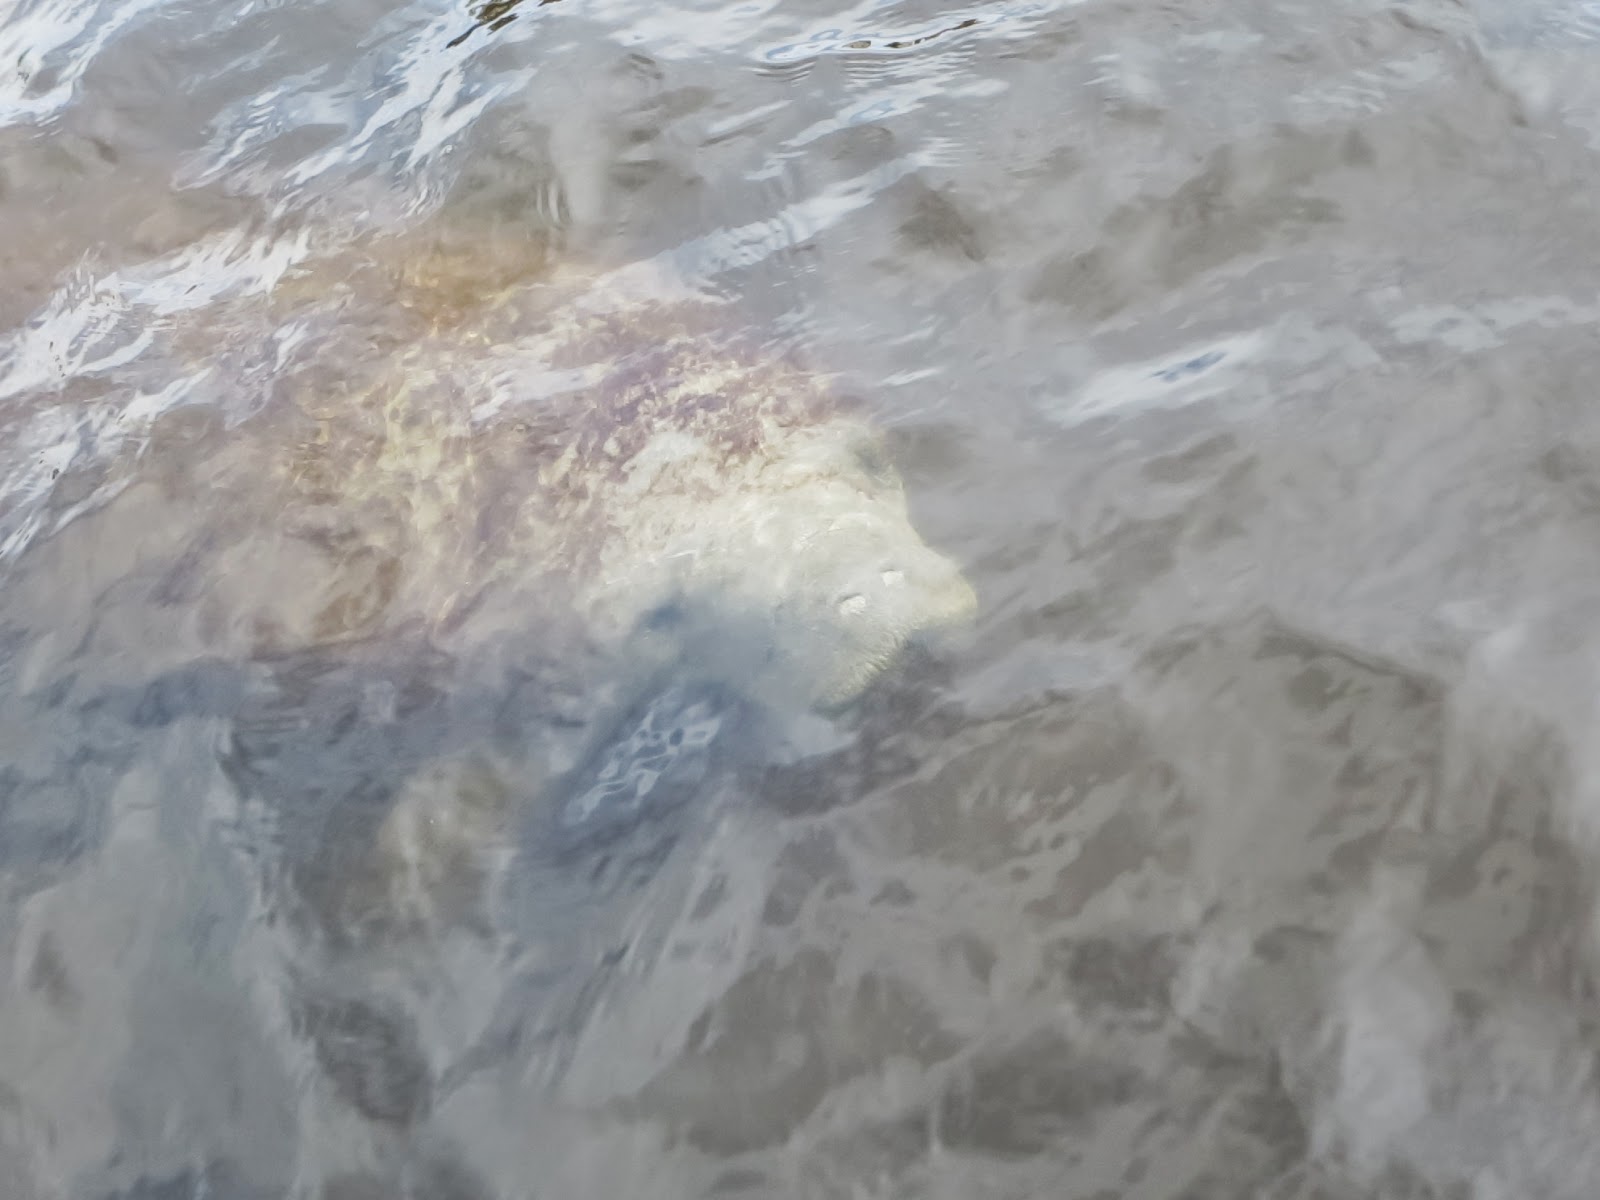 Manatee seen below the surface of the water near the Florida Everglades in Naples